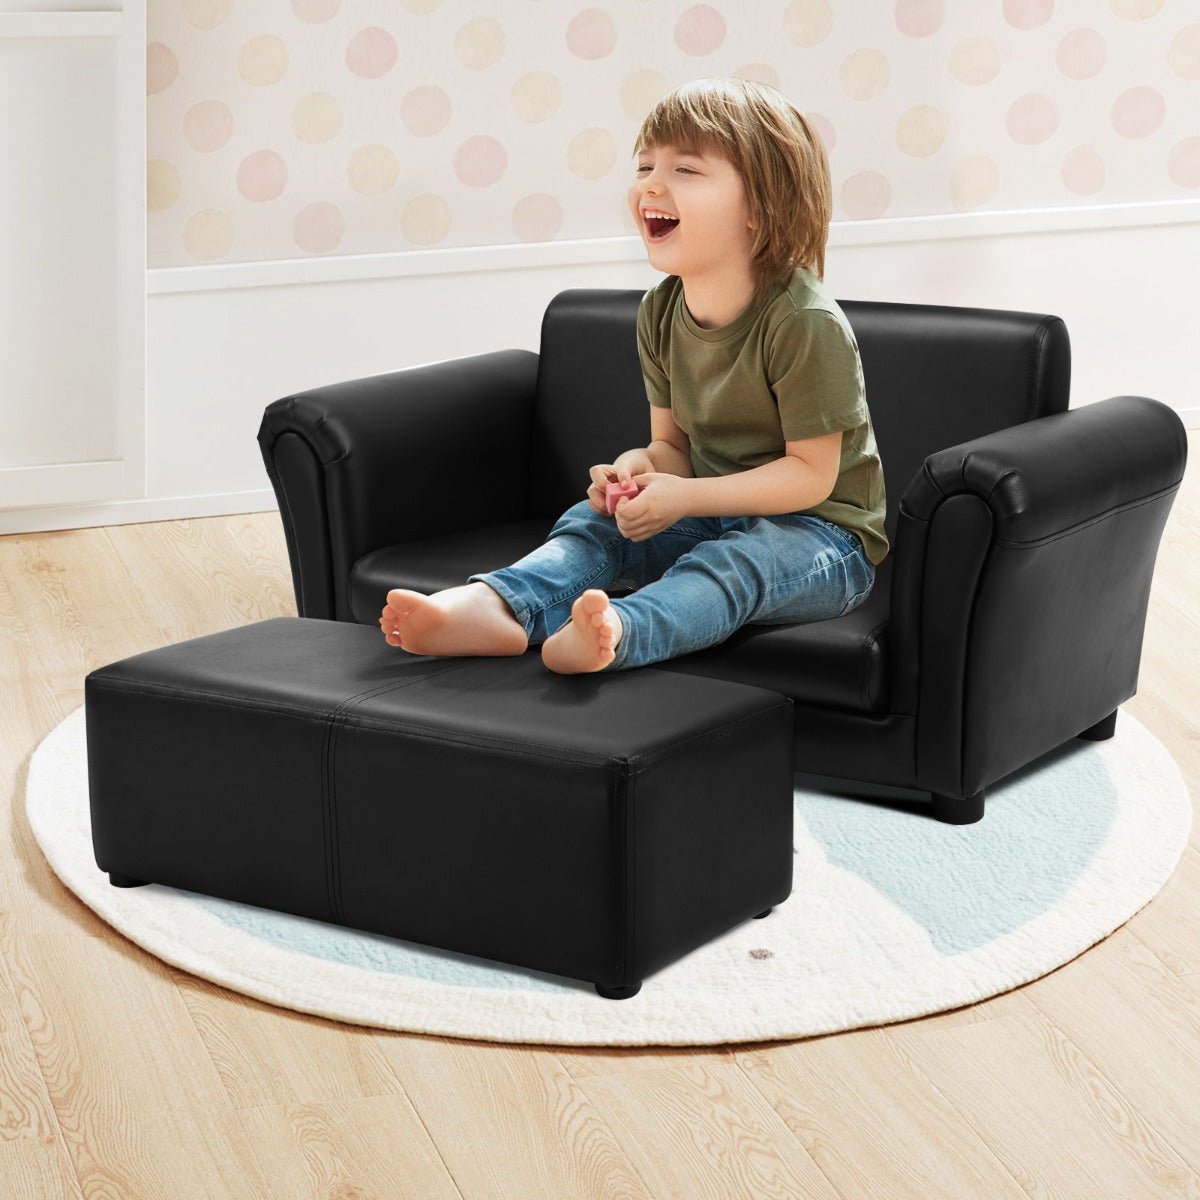 2-Seat Children's Sofa Set: Wooden Frame, Footstool, and Cozy Seating